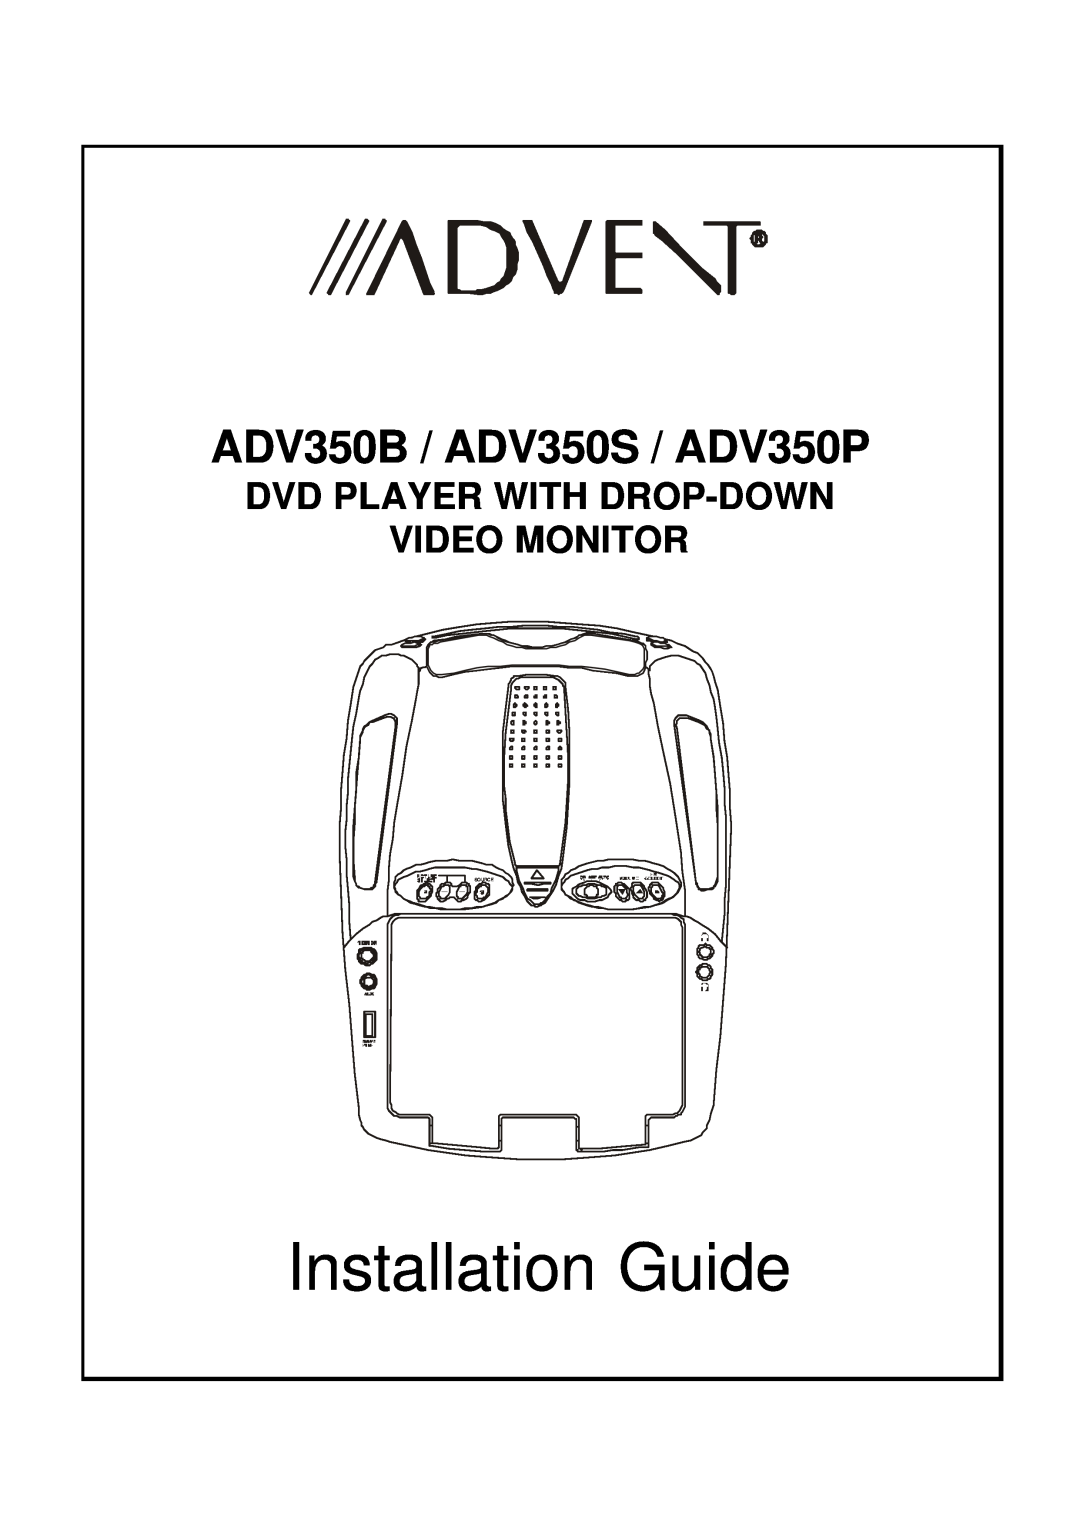 Recoton/Advent manual Dvd Player With Drop-Down Video Monitor, Installation Guide, ADV350B / ADV350S / ADV350P, Source 